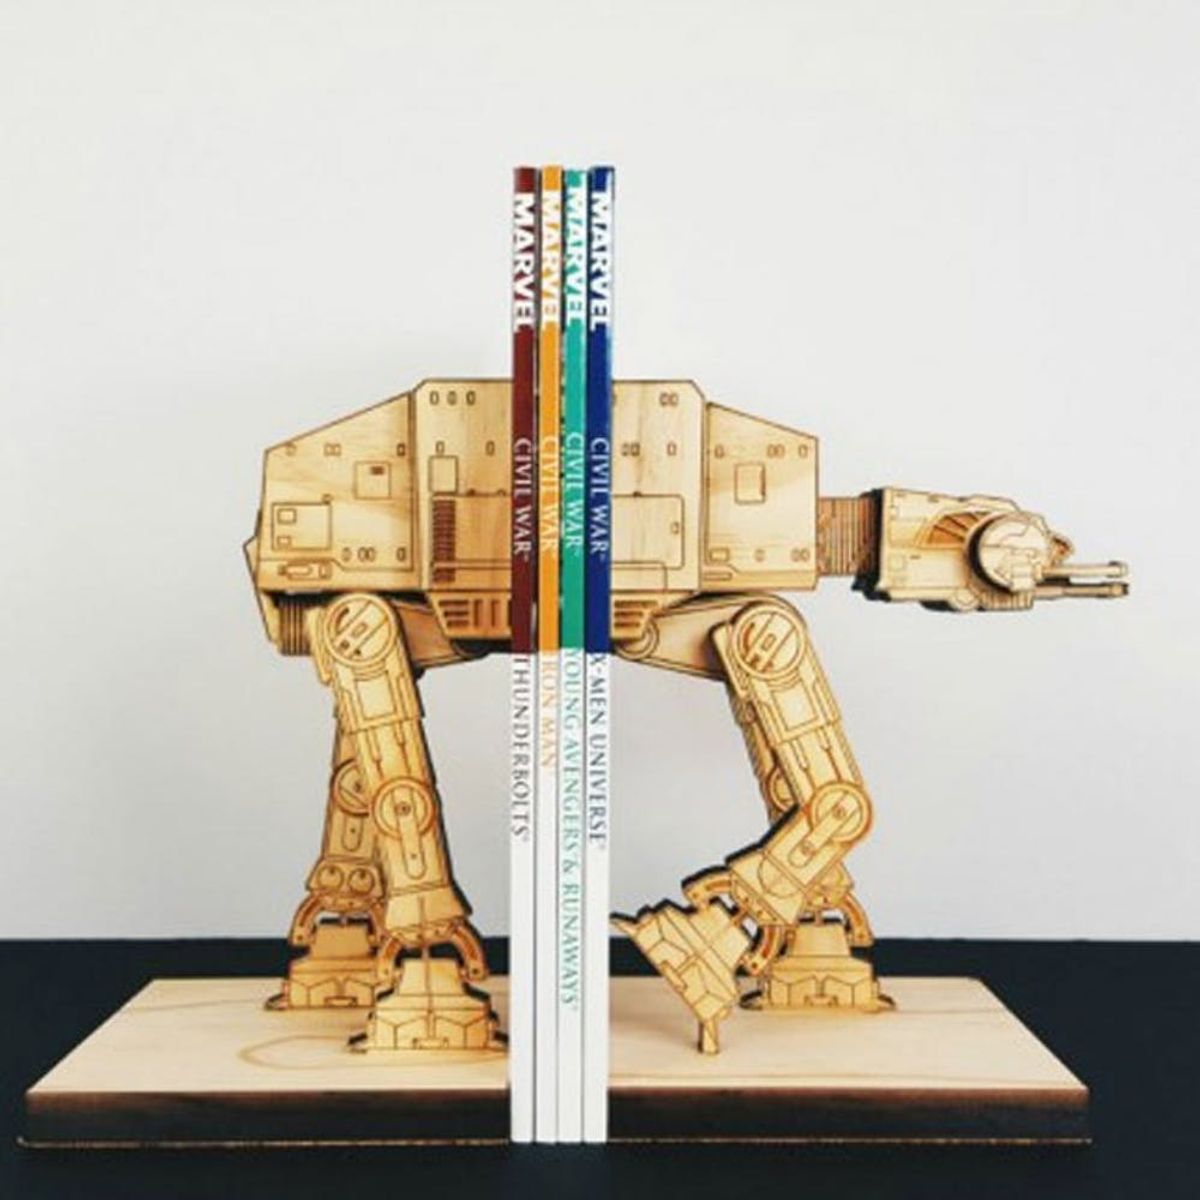 14 Star Wars Desk Accessories to Bring the Force to Your Cubicle